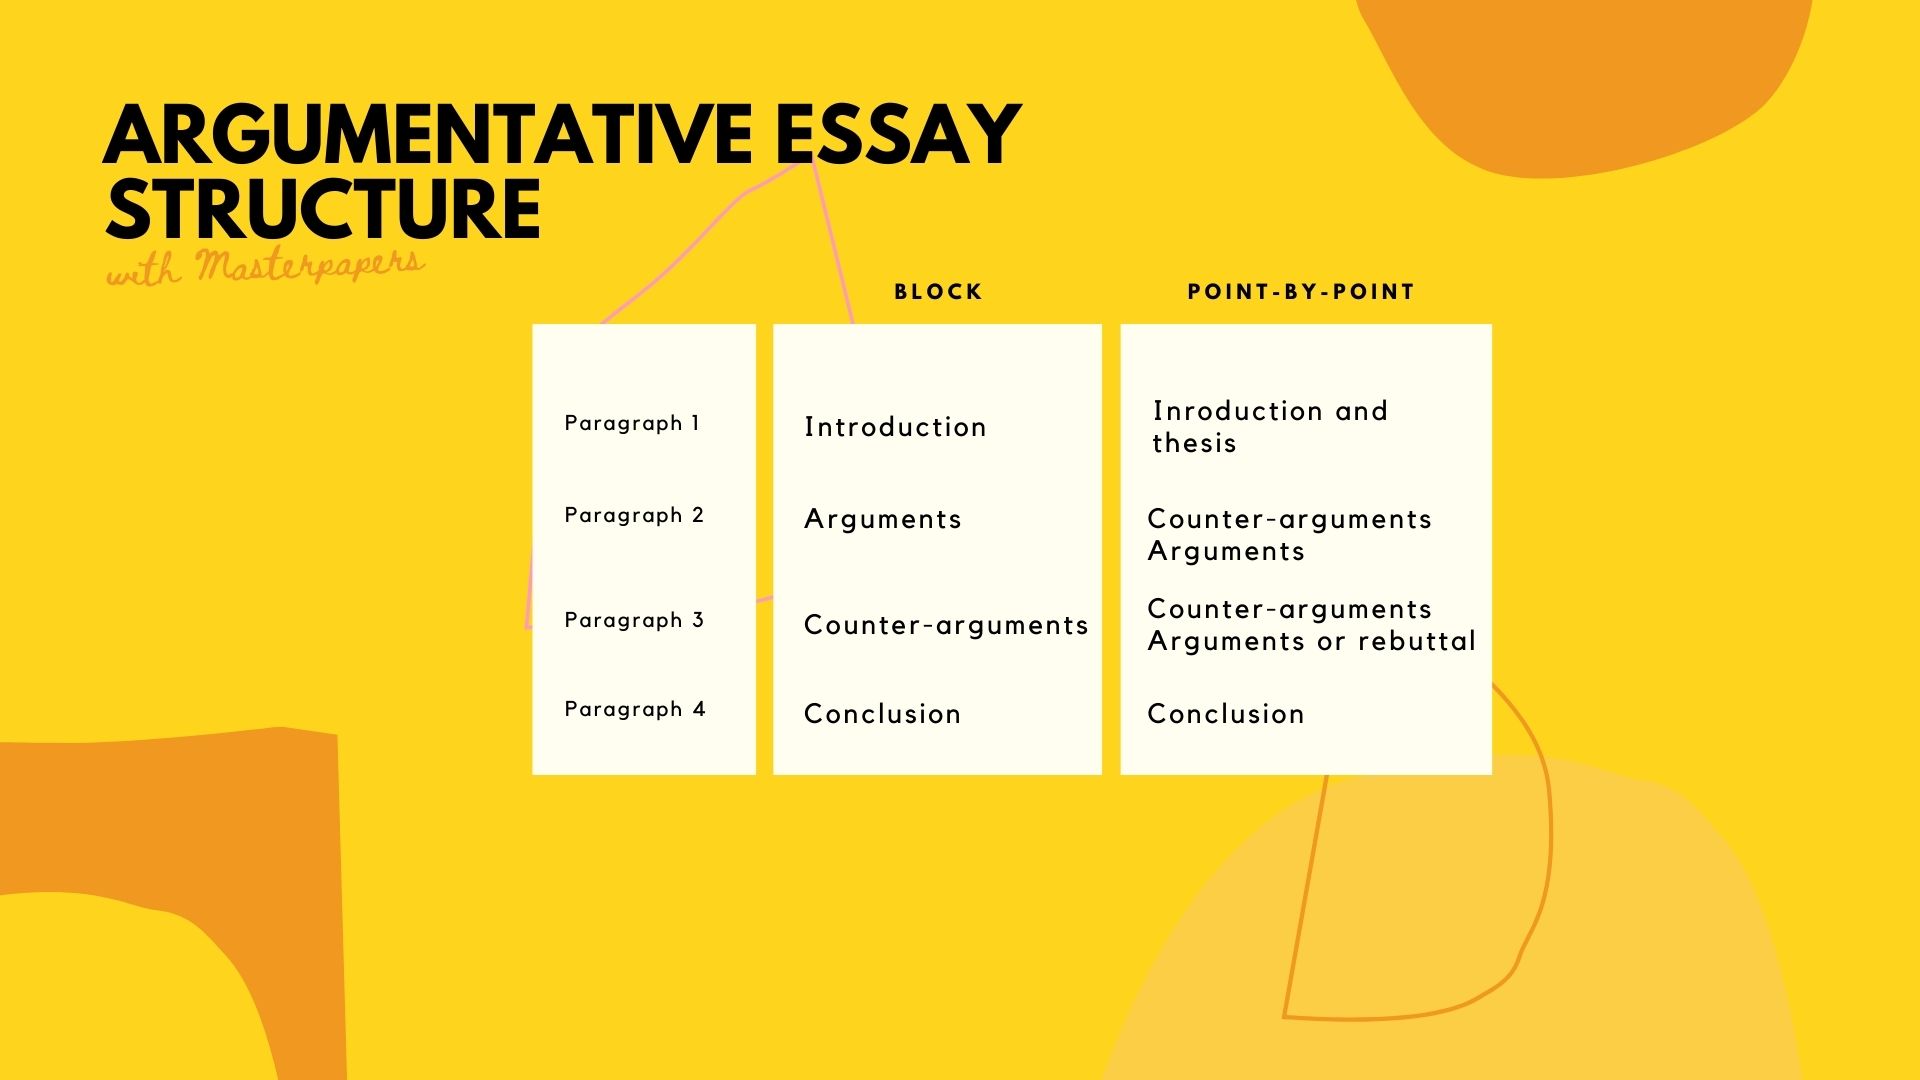 structure of the essay in argumentative